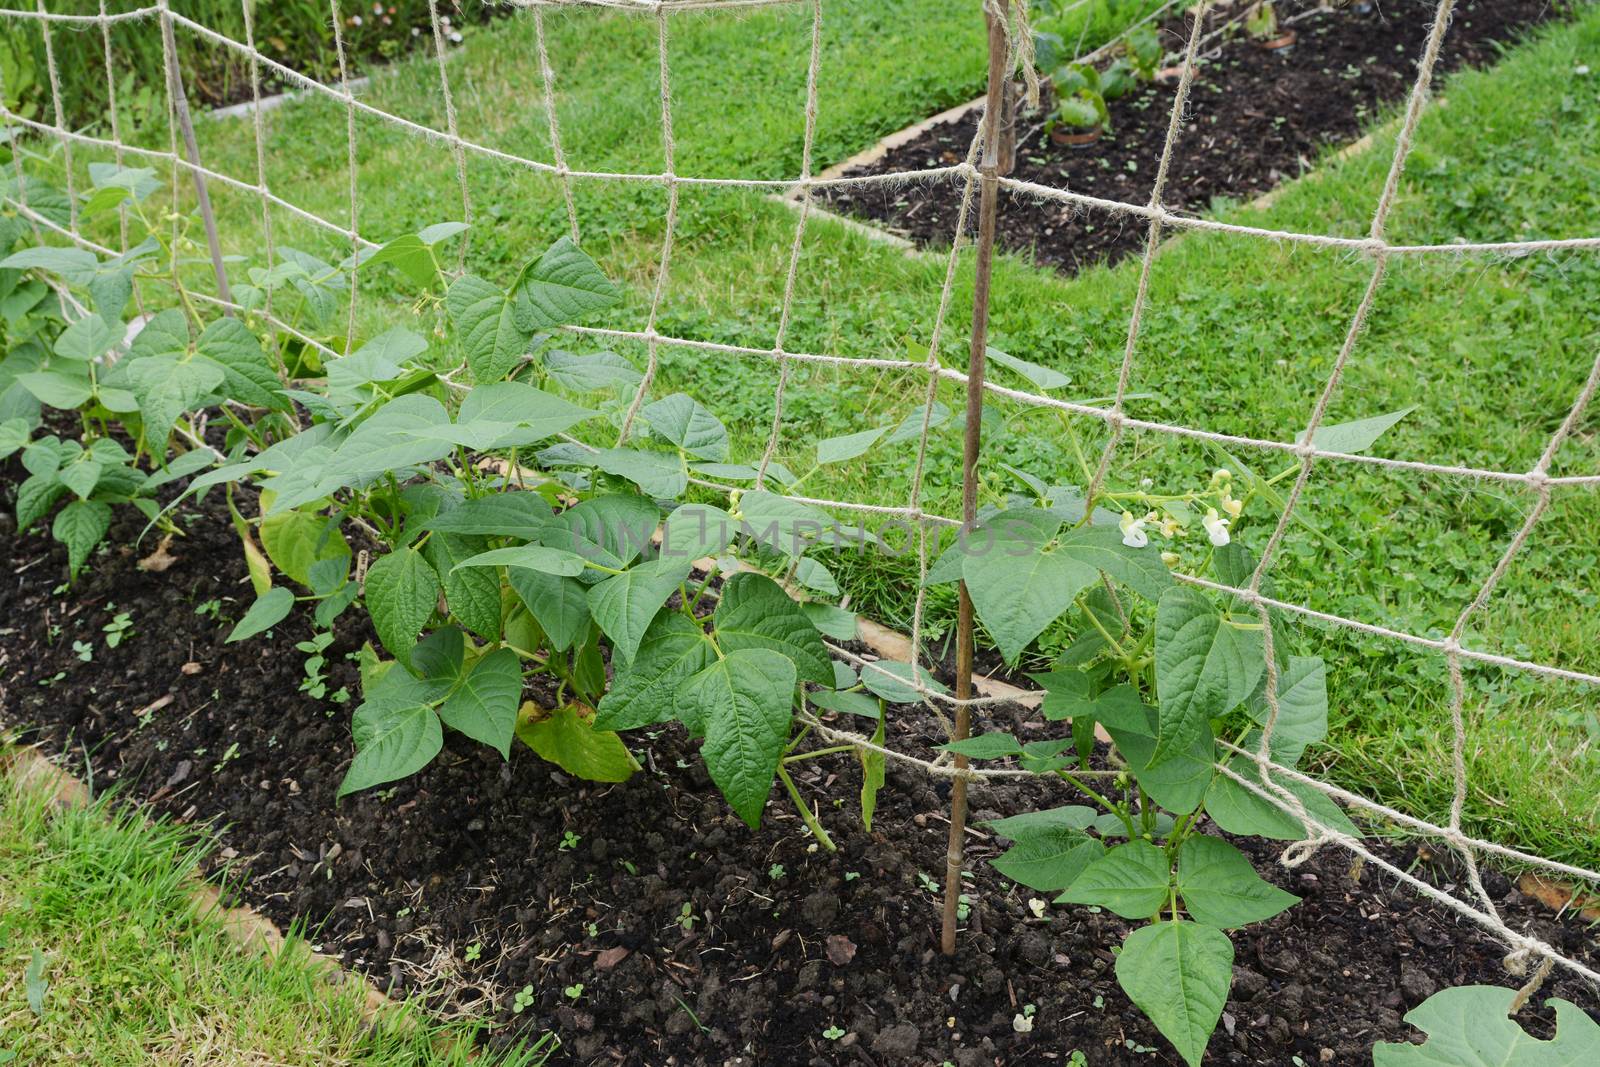 Young calypso bean plants, supported by twine netting in a lush vegetable garden